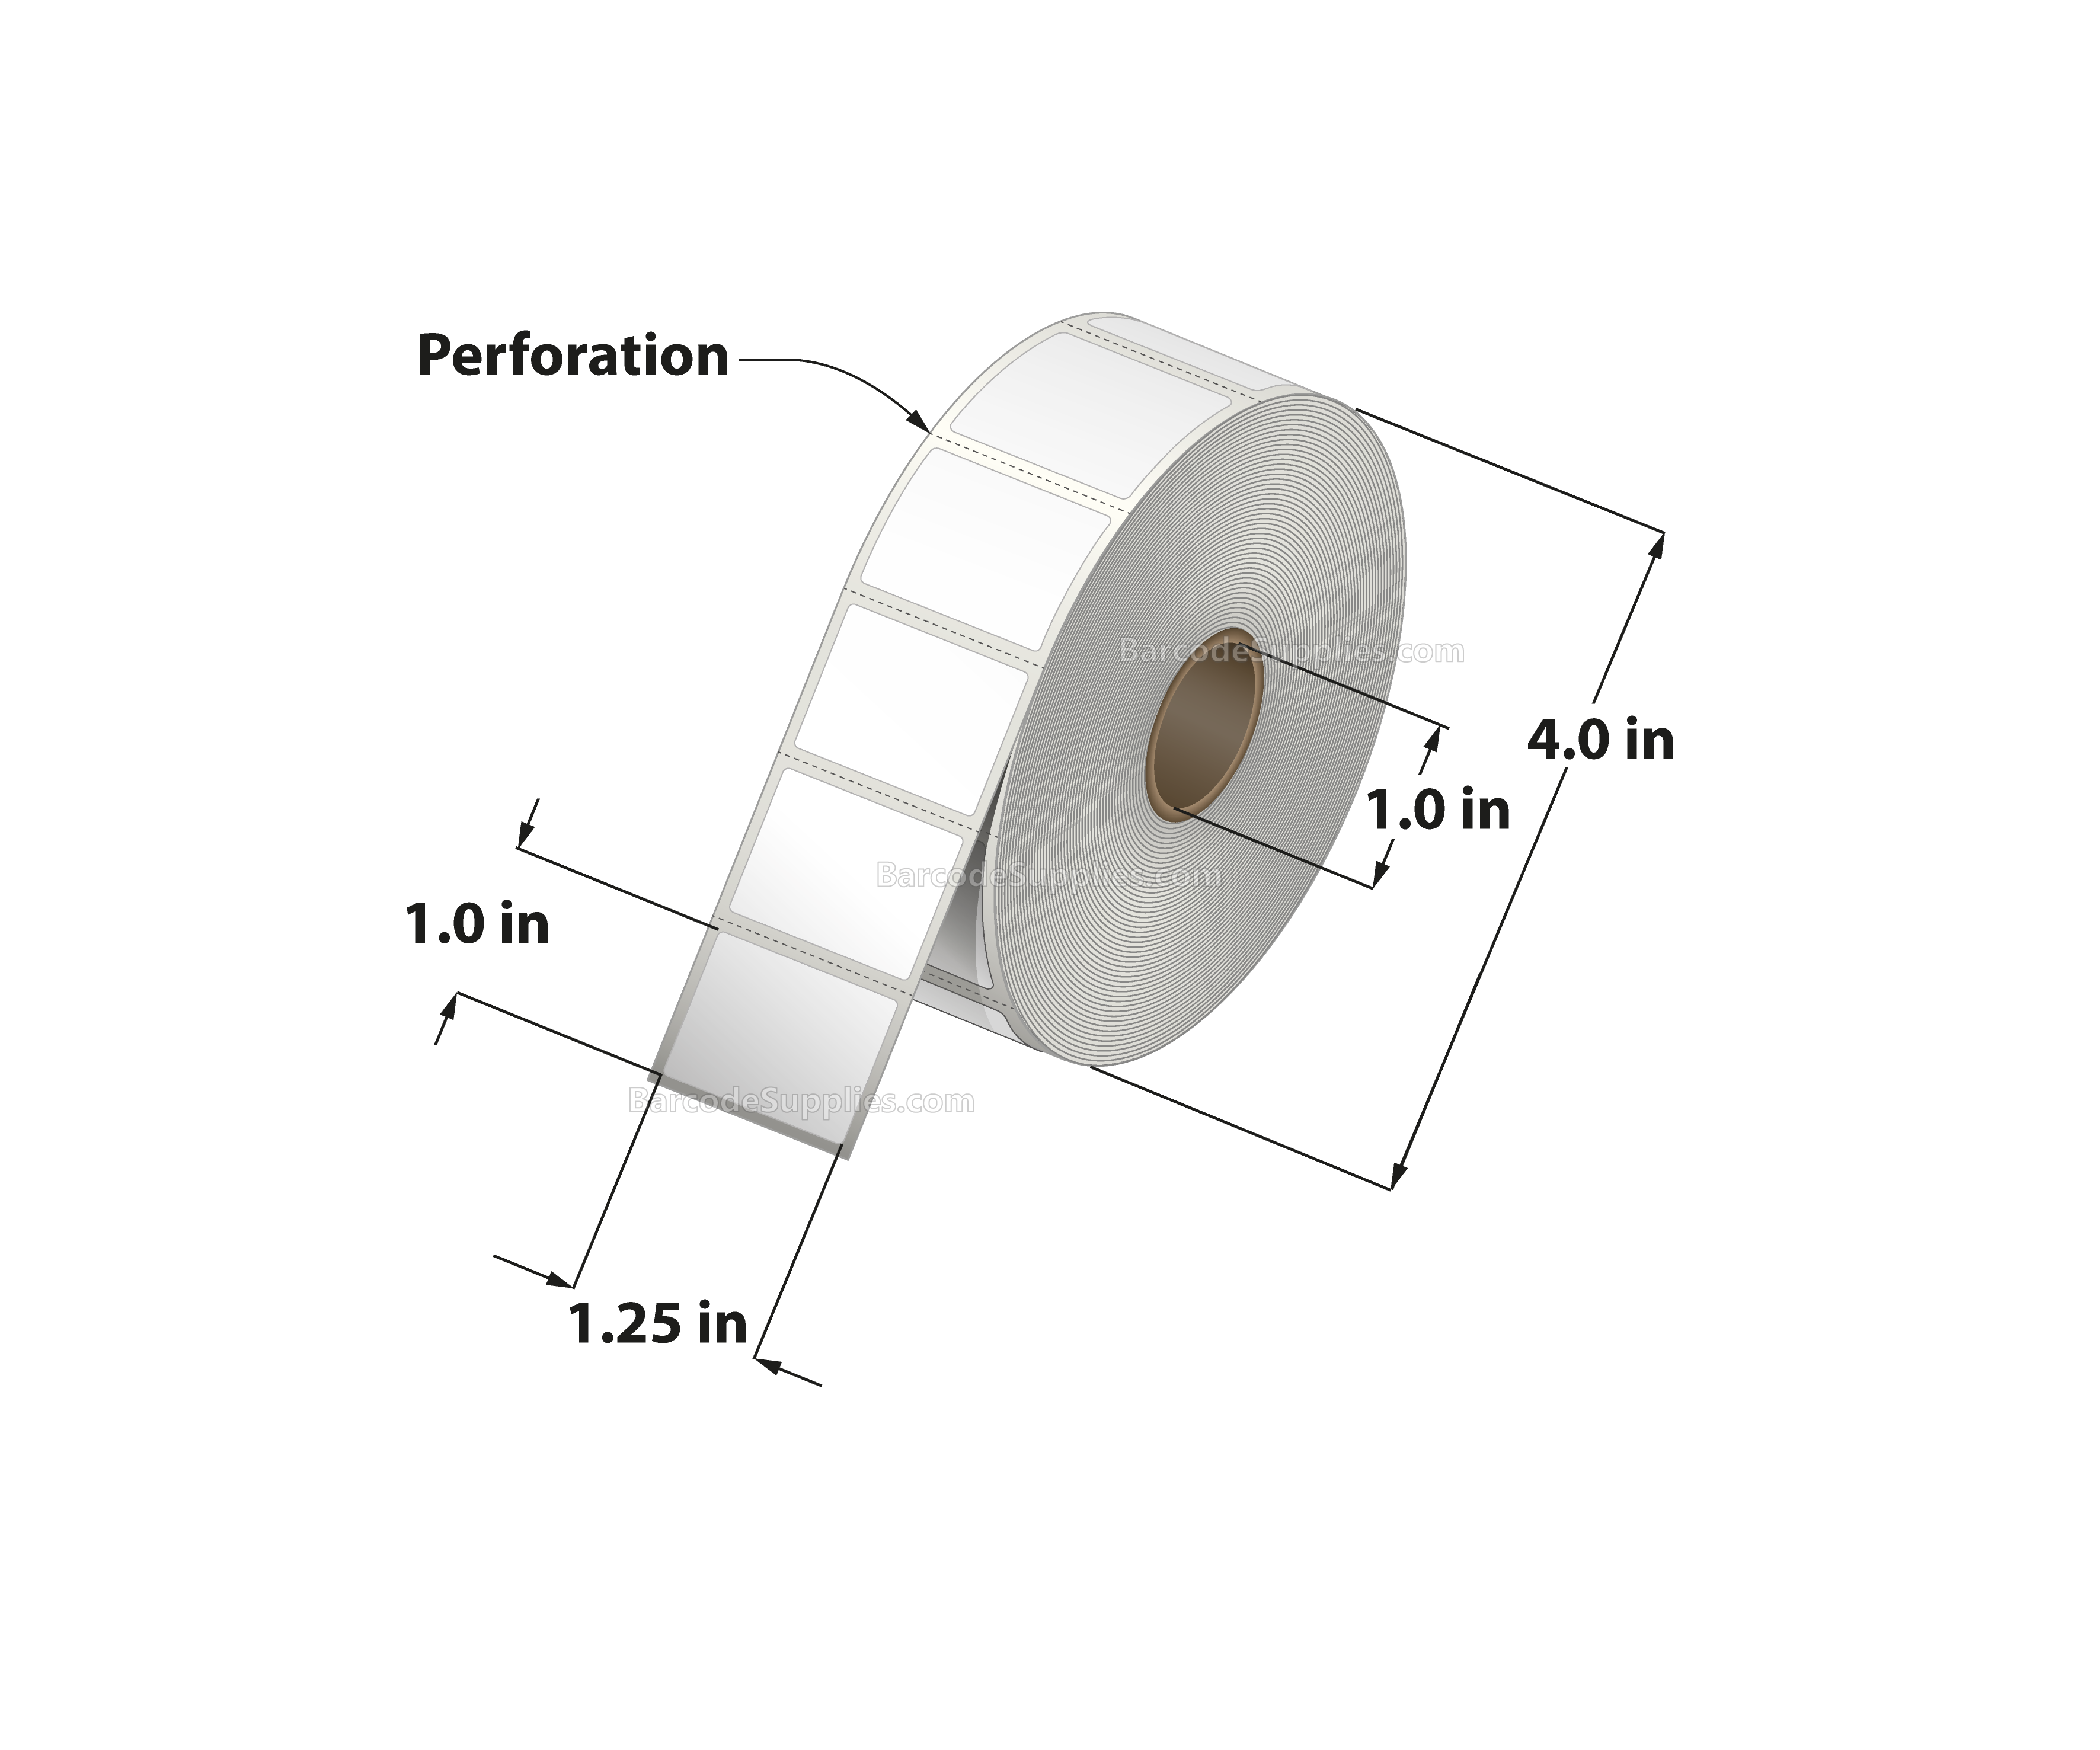 1.25 x 1 Direct Thermal White Labels With Acrylic Adhesive - Perforated - 1375 Labels Per Roll - Carton Of 12 Rolls - 16500 Labels Total - MPN: RD-125-1-1375-1 - BarcodeSource, Inc.